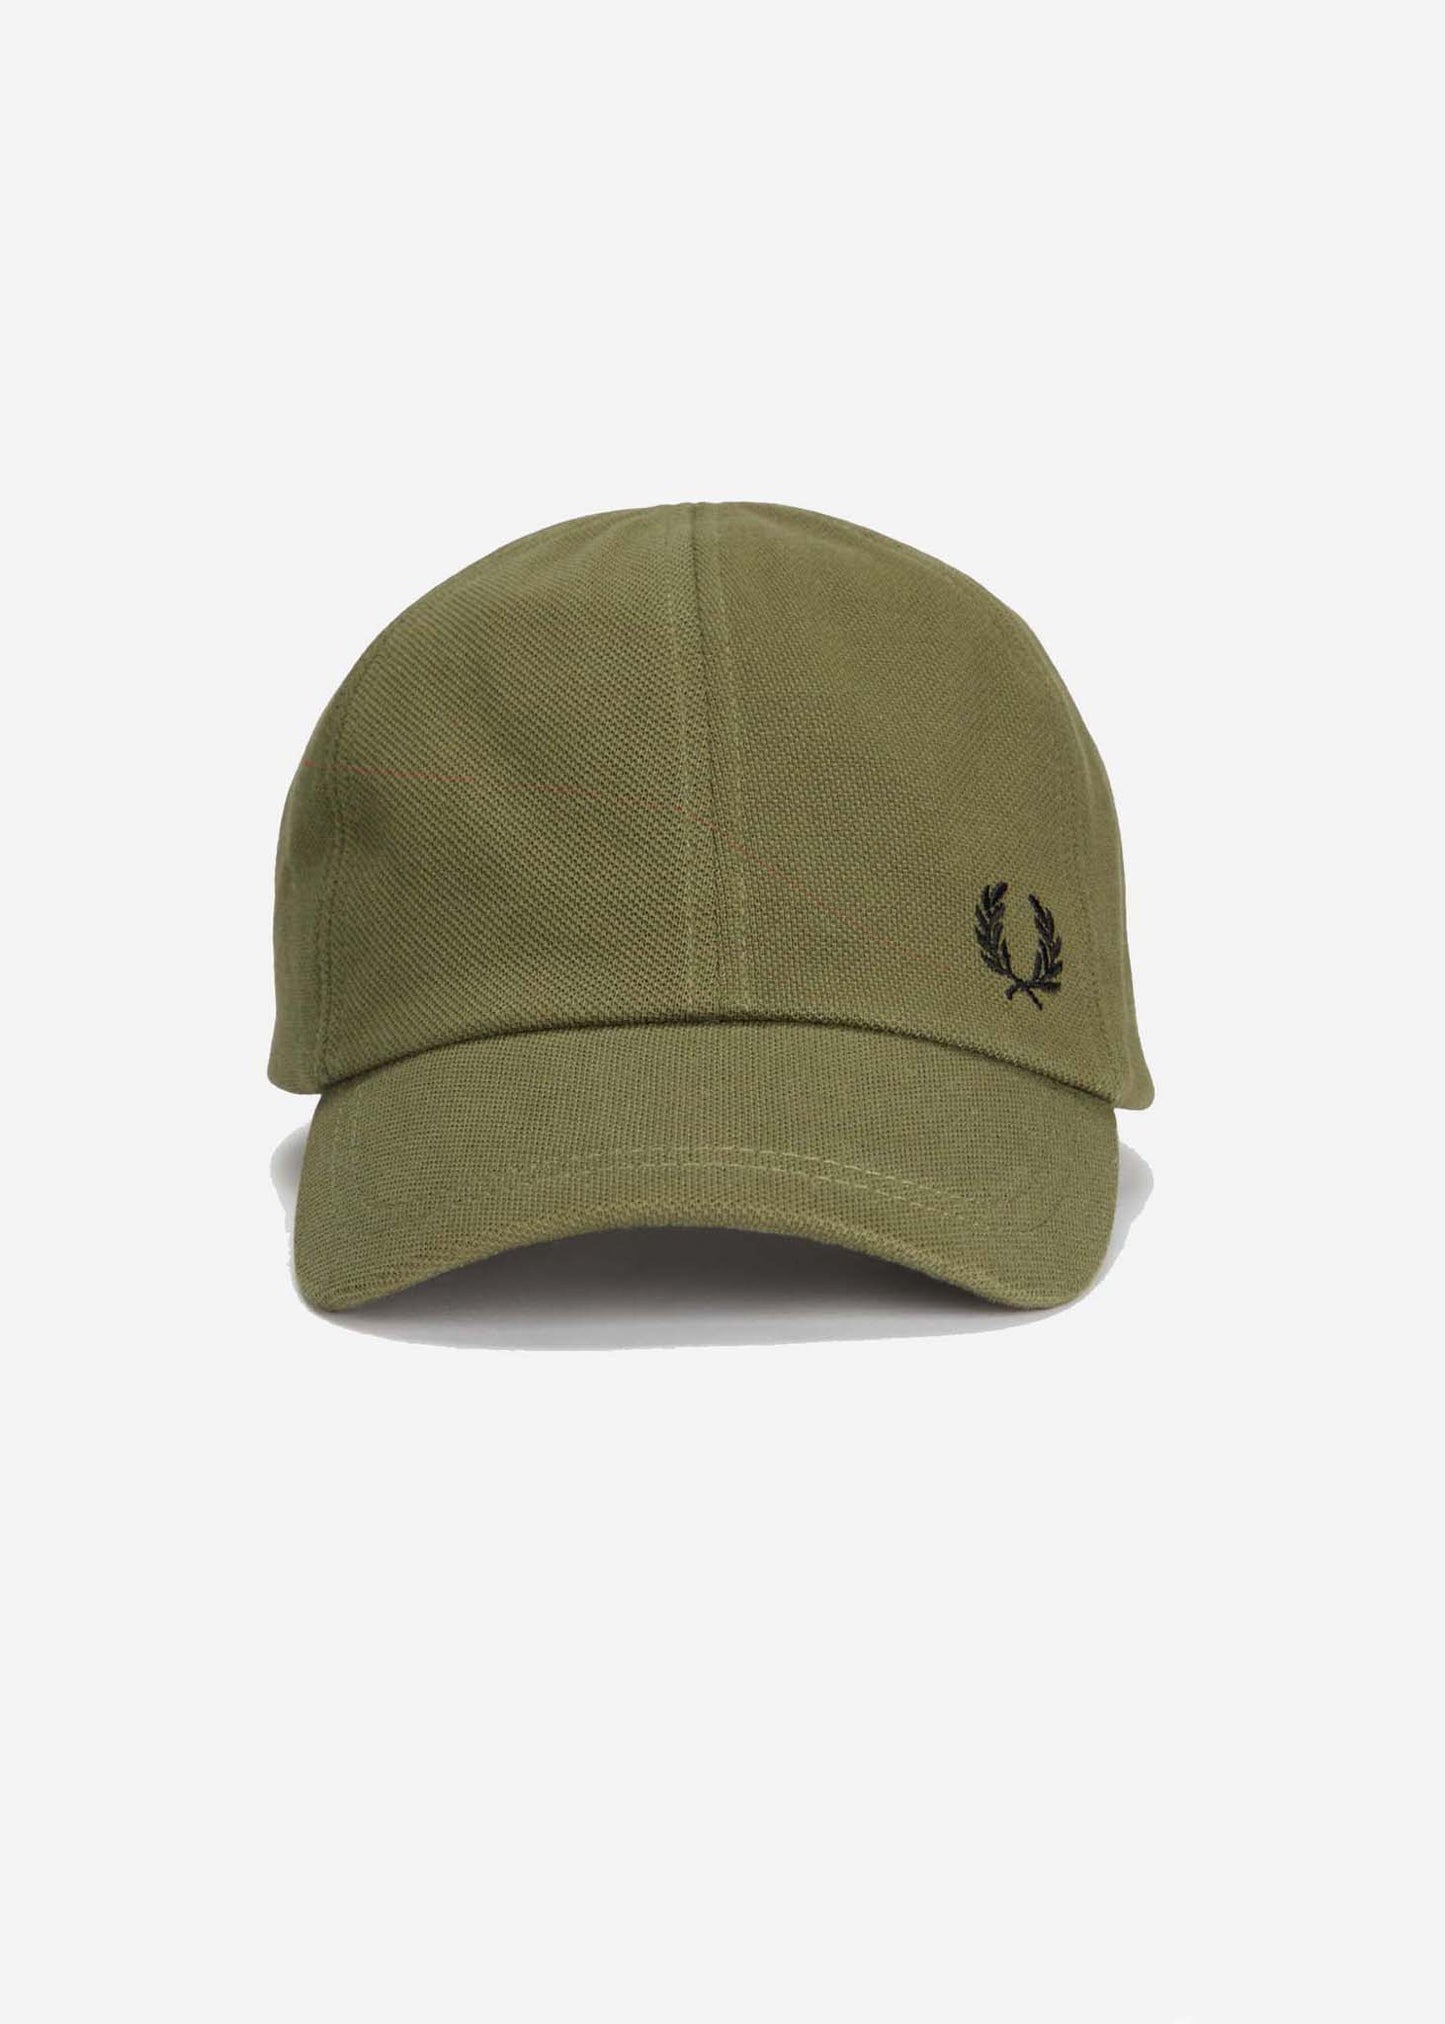 Fred Perry cap green